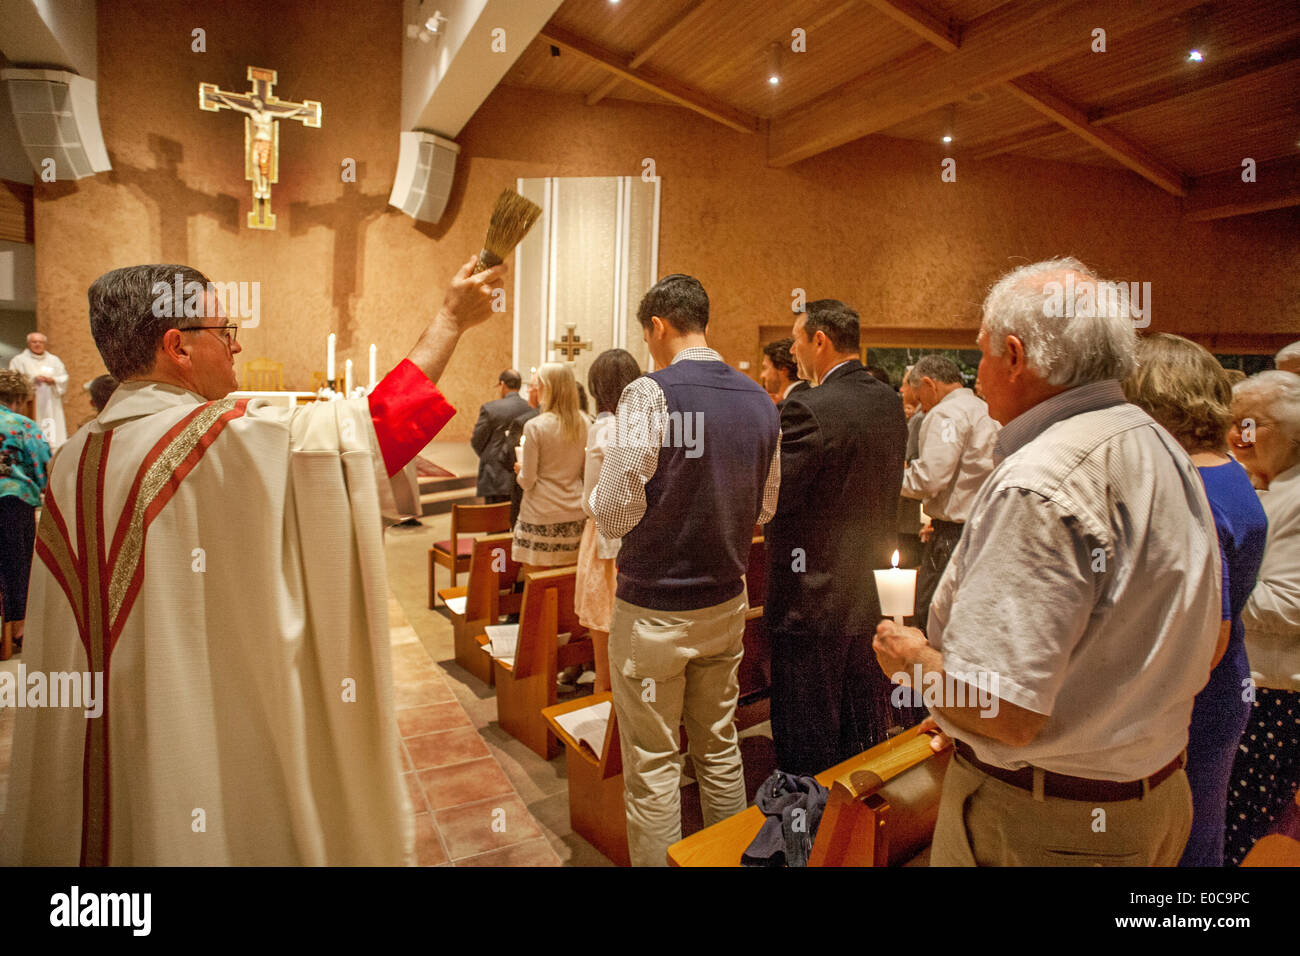 At the conclusion of the great Easter Vigil mass, the pastor of St. Timothy's Catholic Church, Laguna Niguel, CA, sprinkles holy water over his congregation using a stiff brush. Stock Photo